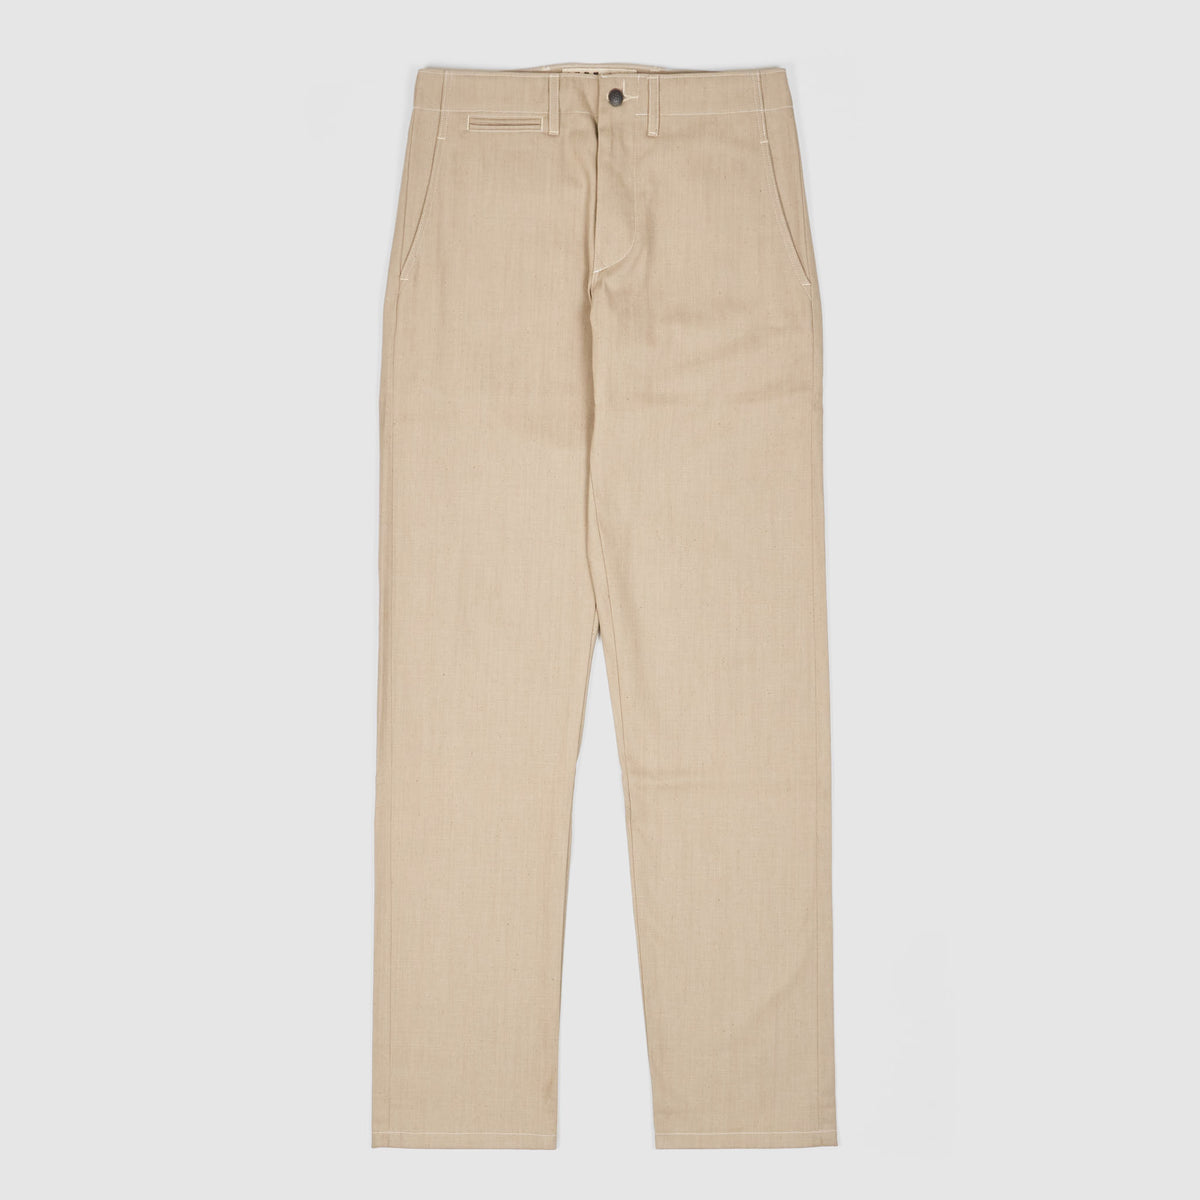 Red White Blue Co. Straight Fitted Chino Pants